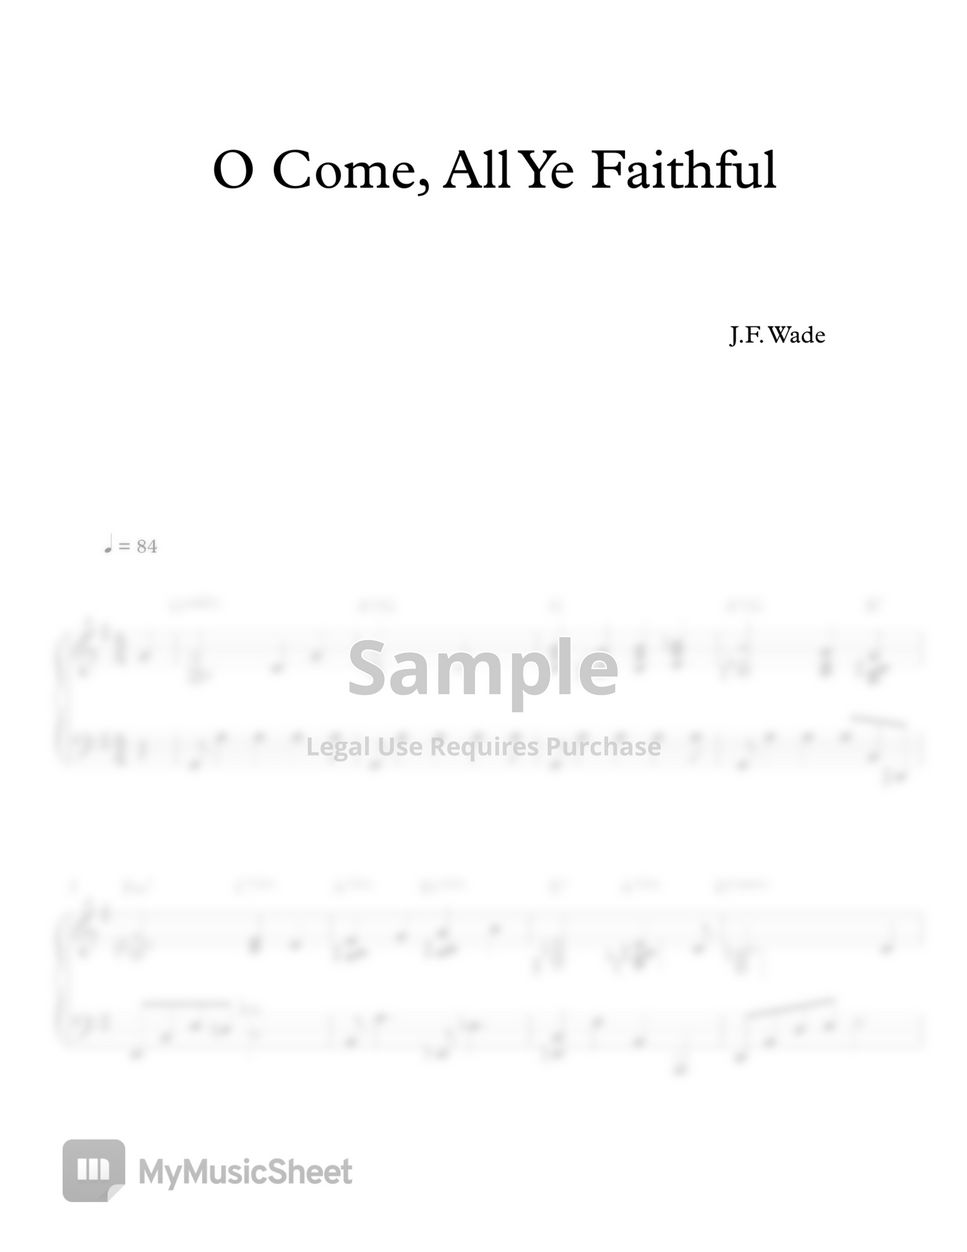 J.F. Wade - O Come All ye Faithful (Jazz ver.) by MIWHA